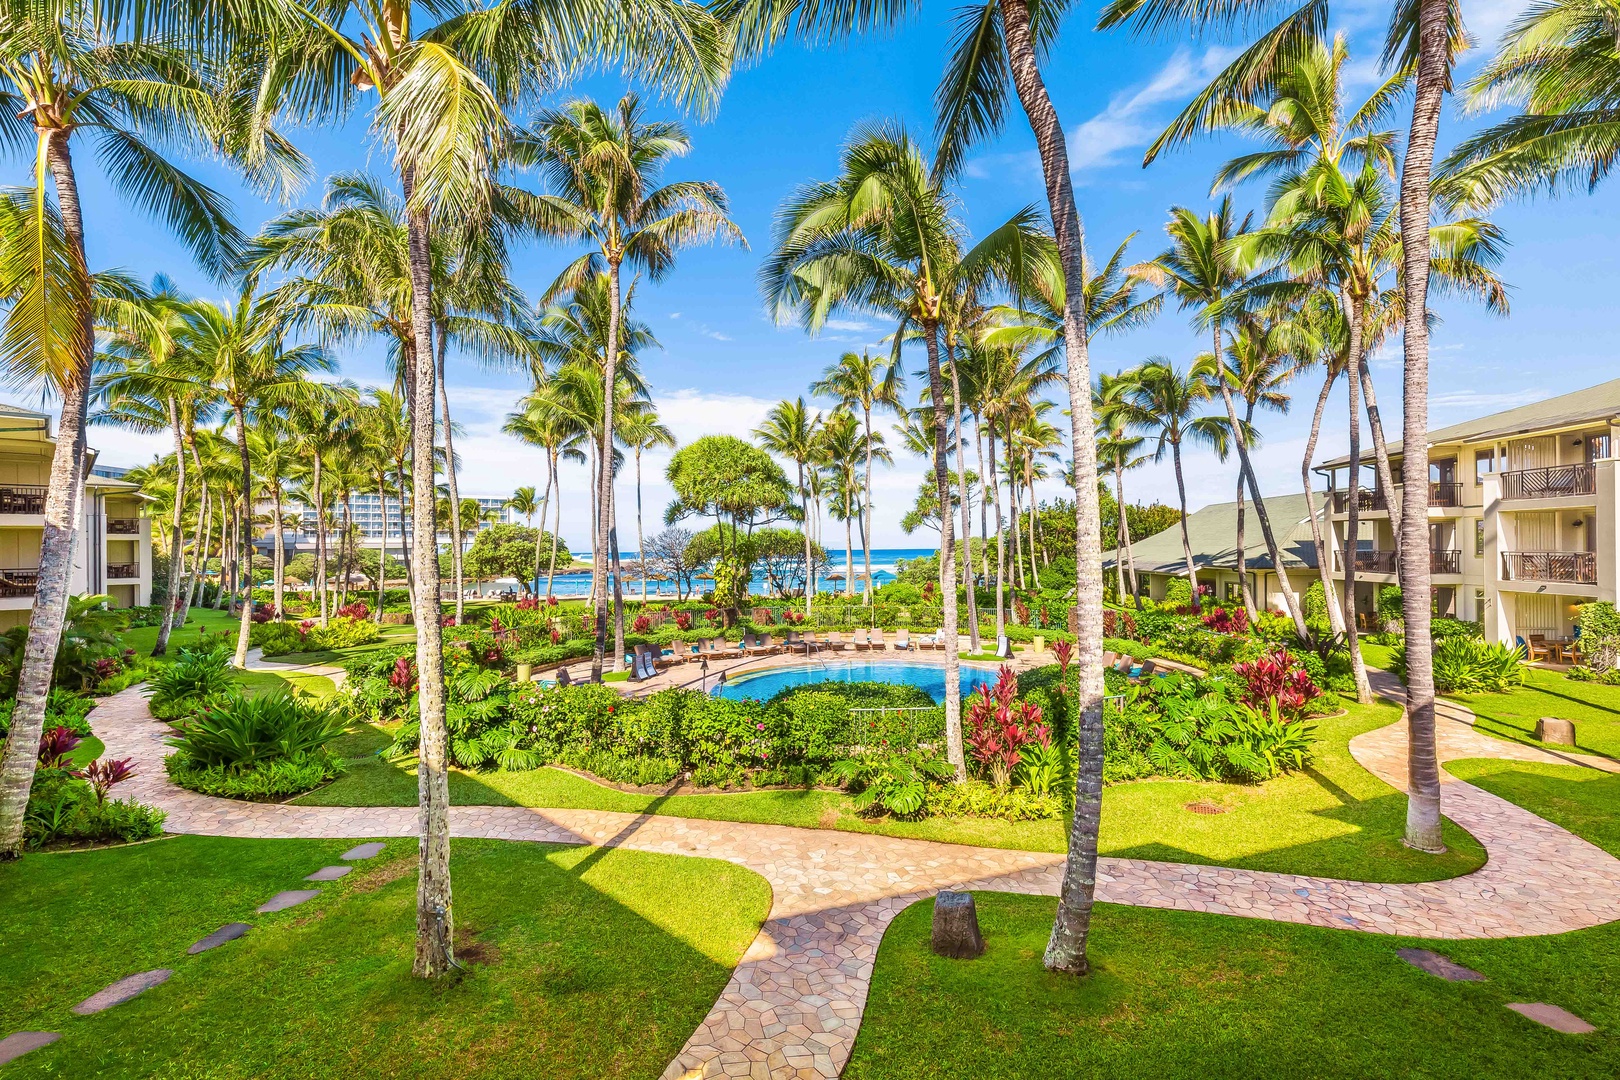 Kahuku Vacation Rentals, Turtle Bay Villas 210 - Step outside onto your private, 167-square foot lanai to take in views of the lush, tropical grounds, awe-inspiring Pacific